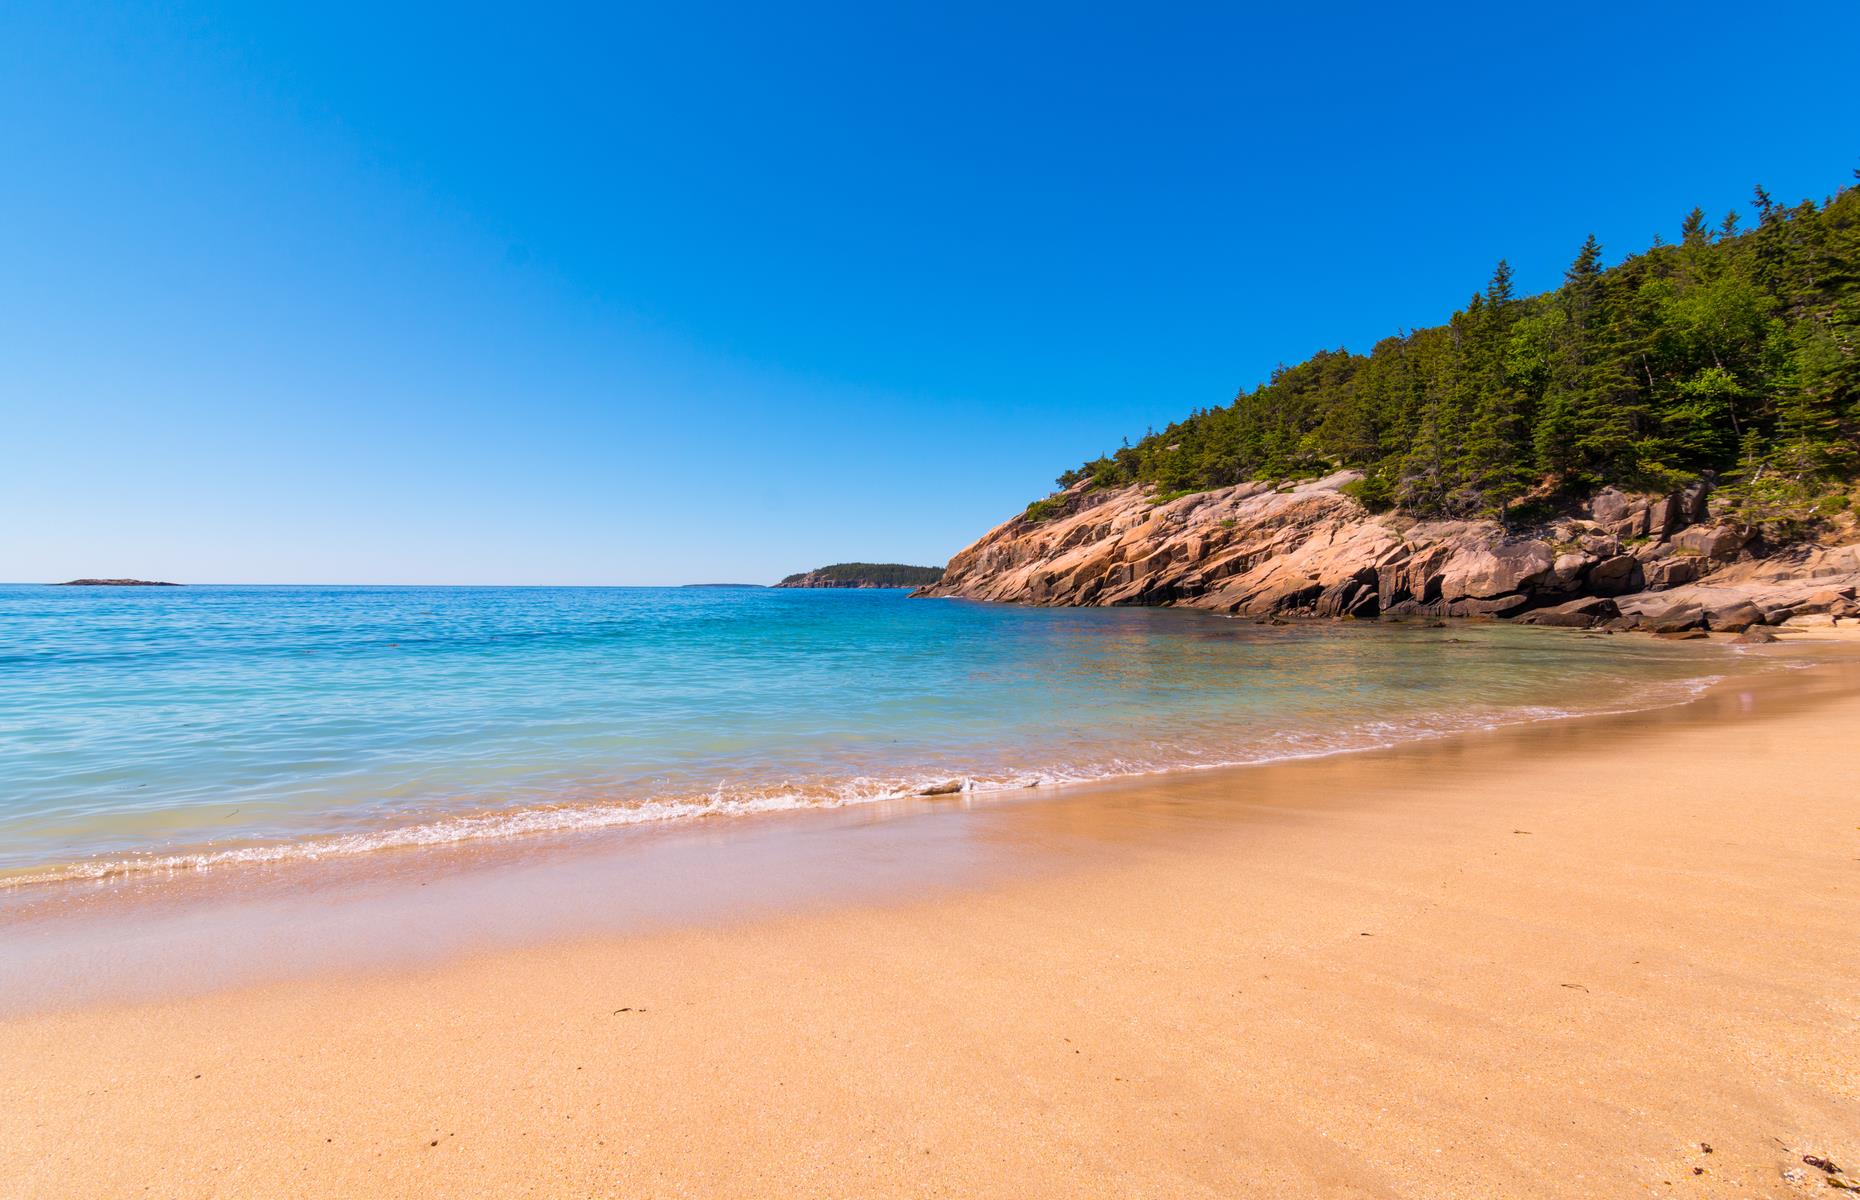 <p>The 27-mile (43km) section that makes up Park Loop Road is the most scenic of all. This portion of the route runs within the limits of Acadia National Park – it travels by Sand Beach (pictured), a golden inlet along the rocky shoreline, and Otter Cliff, a striking 110-foot-high (34m) headland that draws many a budding photographer. Make time for a walking tour of downtown Bar Harbor too.</p>  <p><a href="https://www.loveexploring.com/gallerylist/87456/americas-most-charming-seaside-towns"><strong>America's most beautiful seaside towns</strong></a></p>